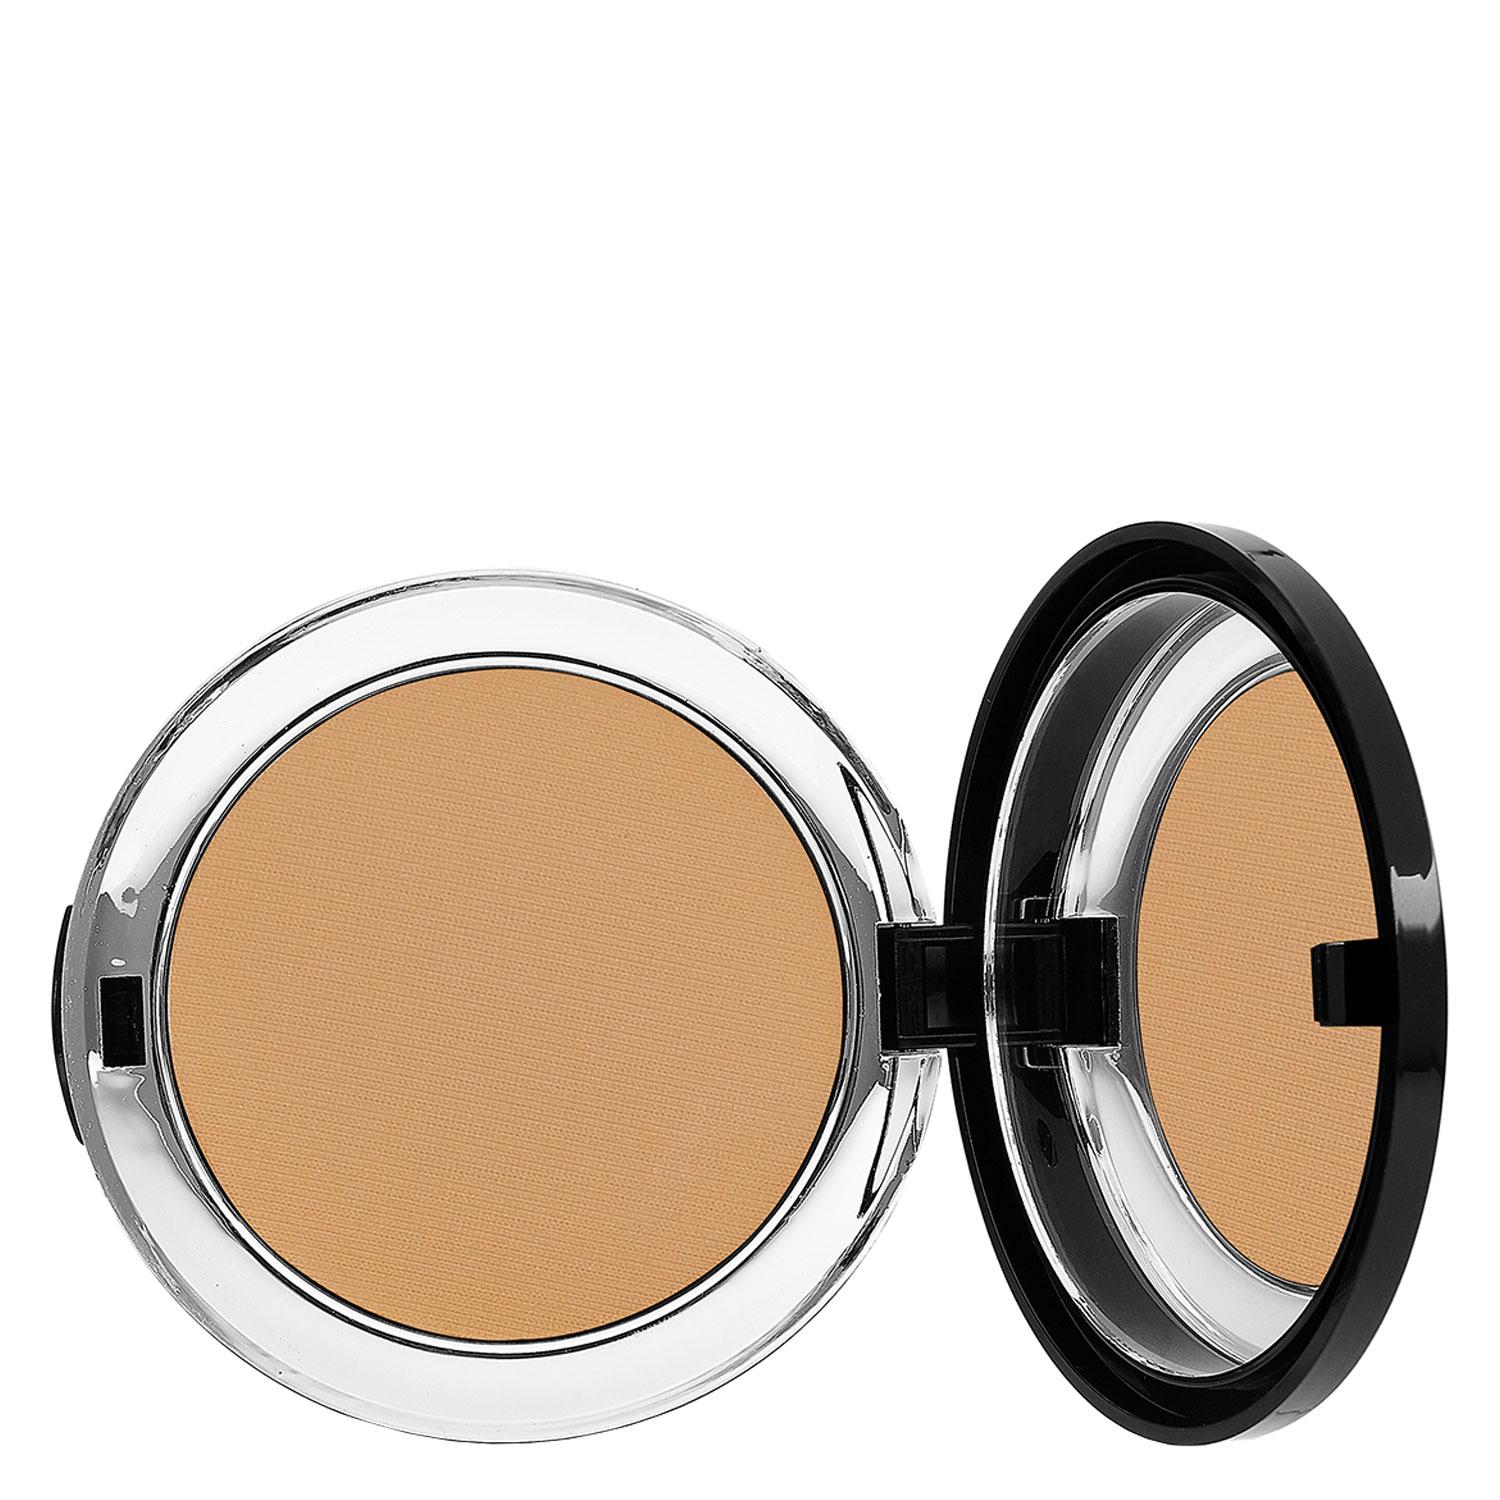 bellapierre Teint - Compact Mineral Foundation SPF15 Maple